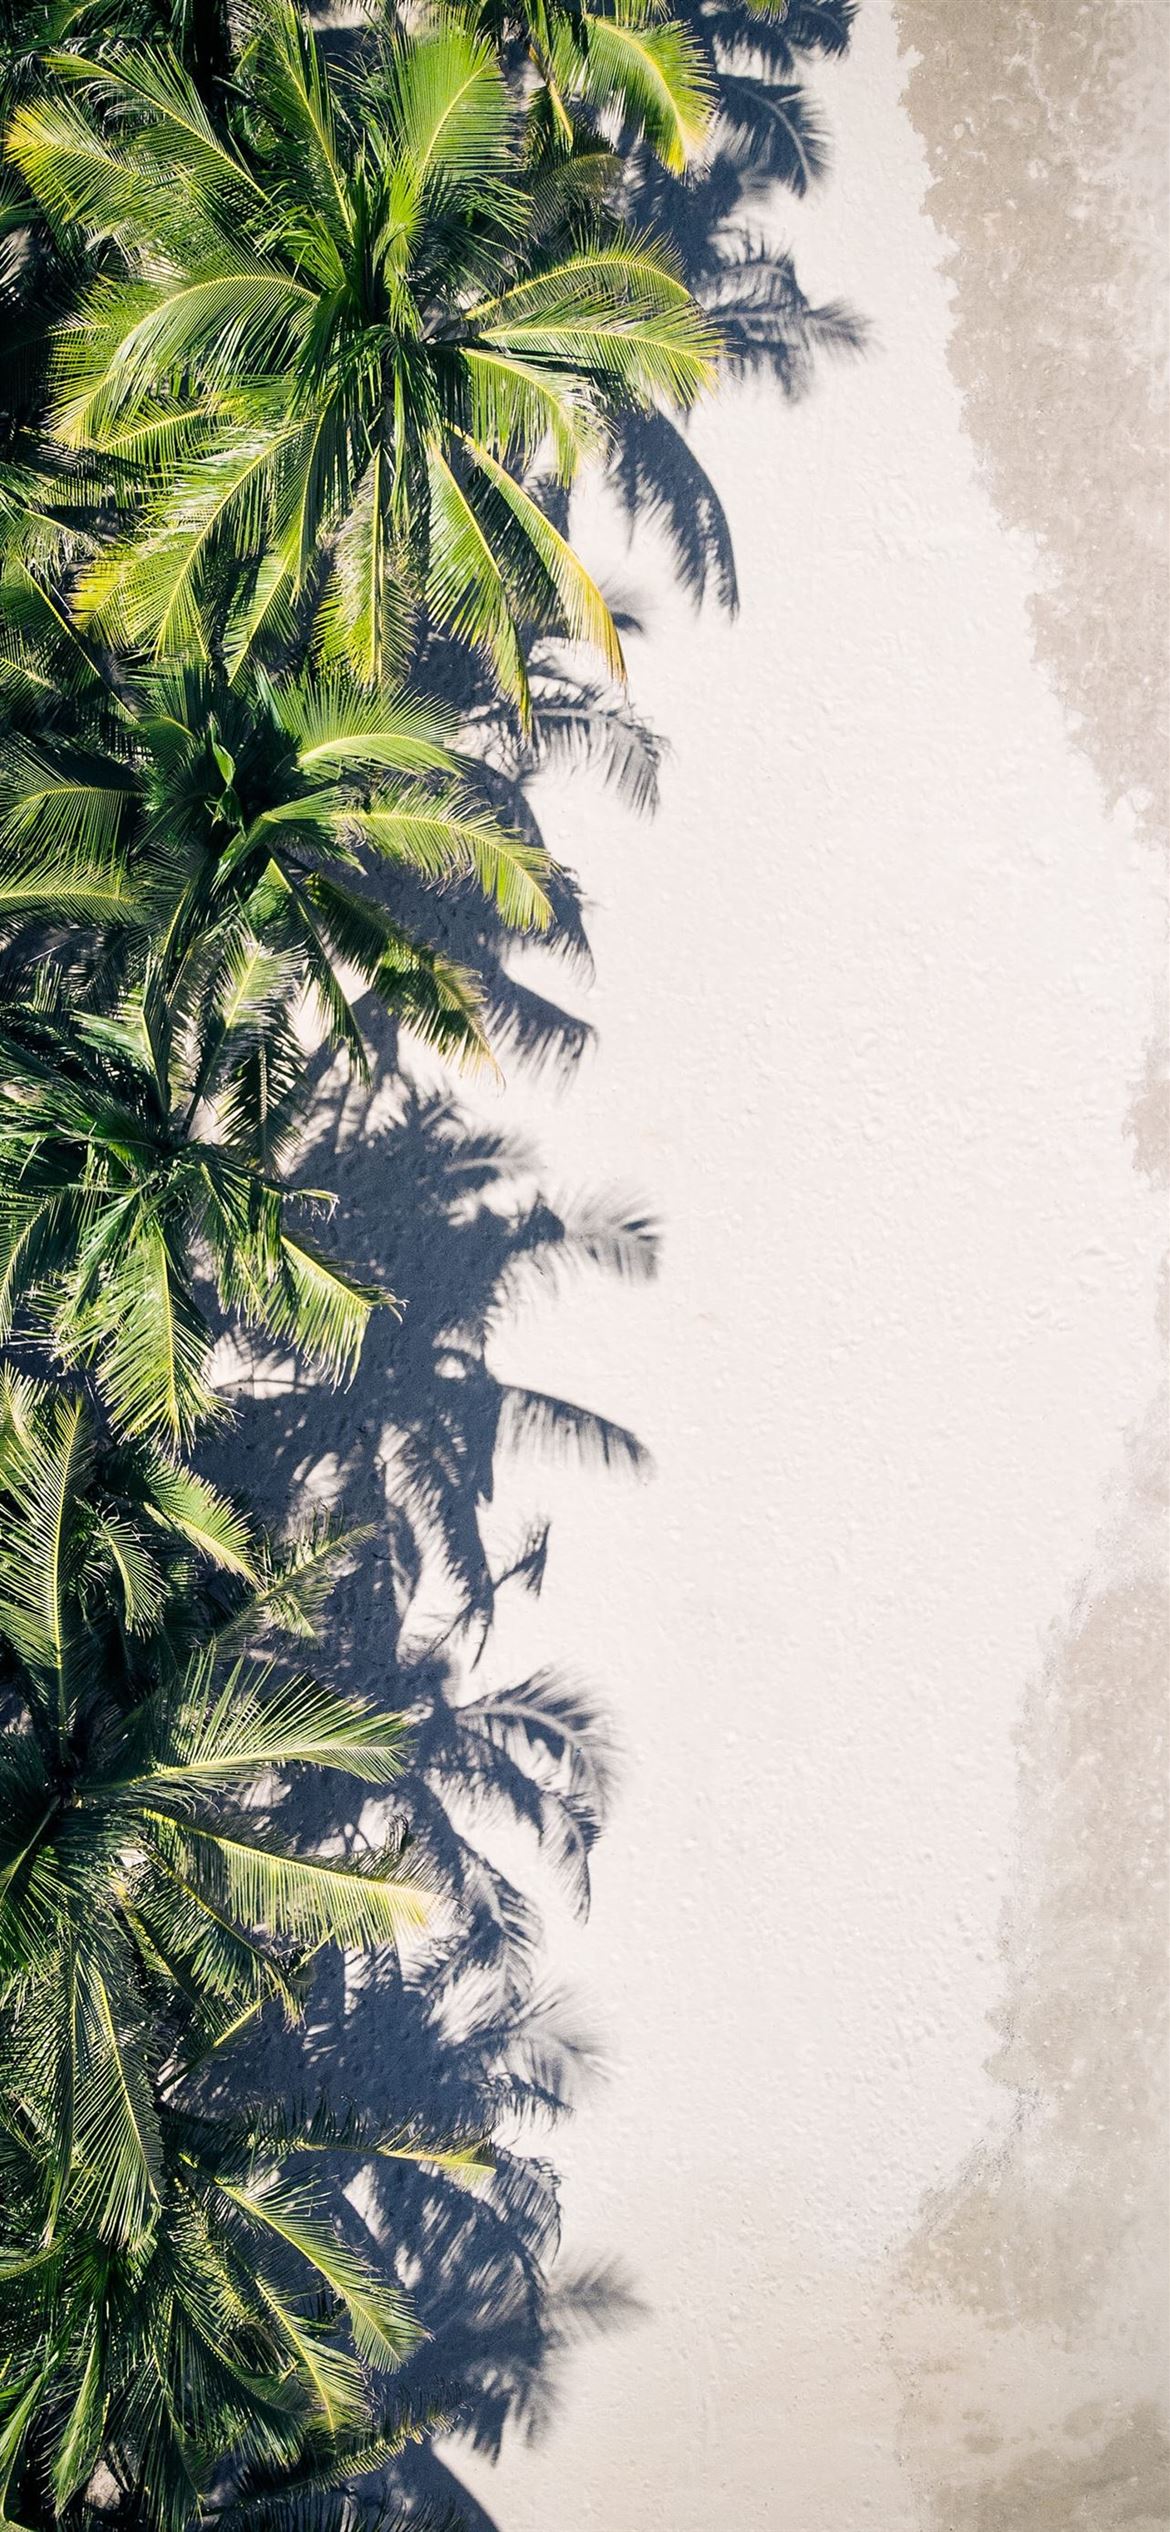 coconut palm trees iPhone 12 Wallpaper Free Download